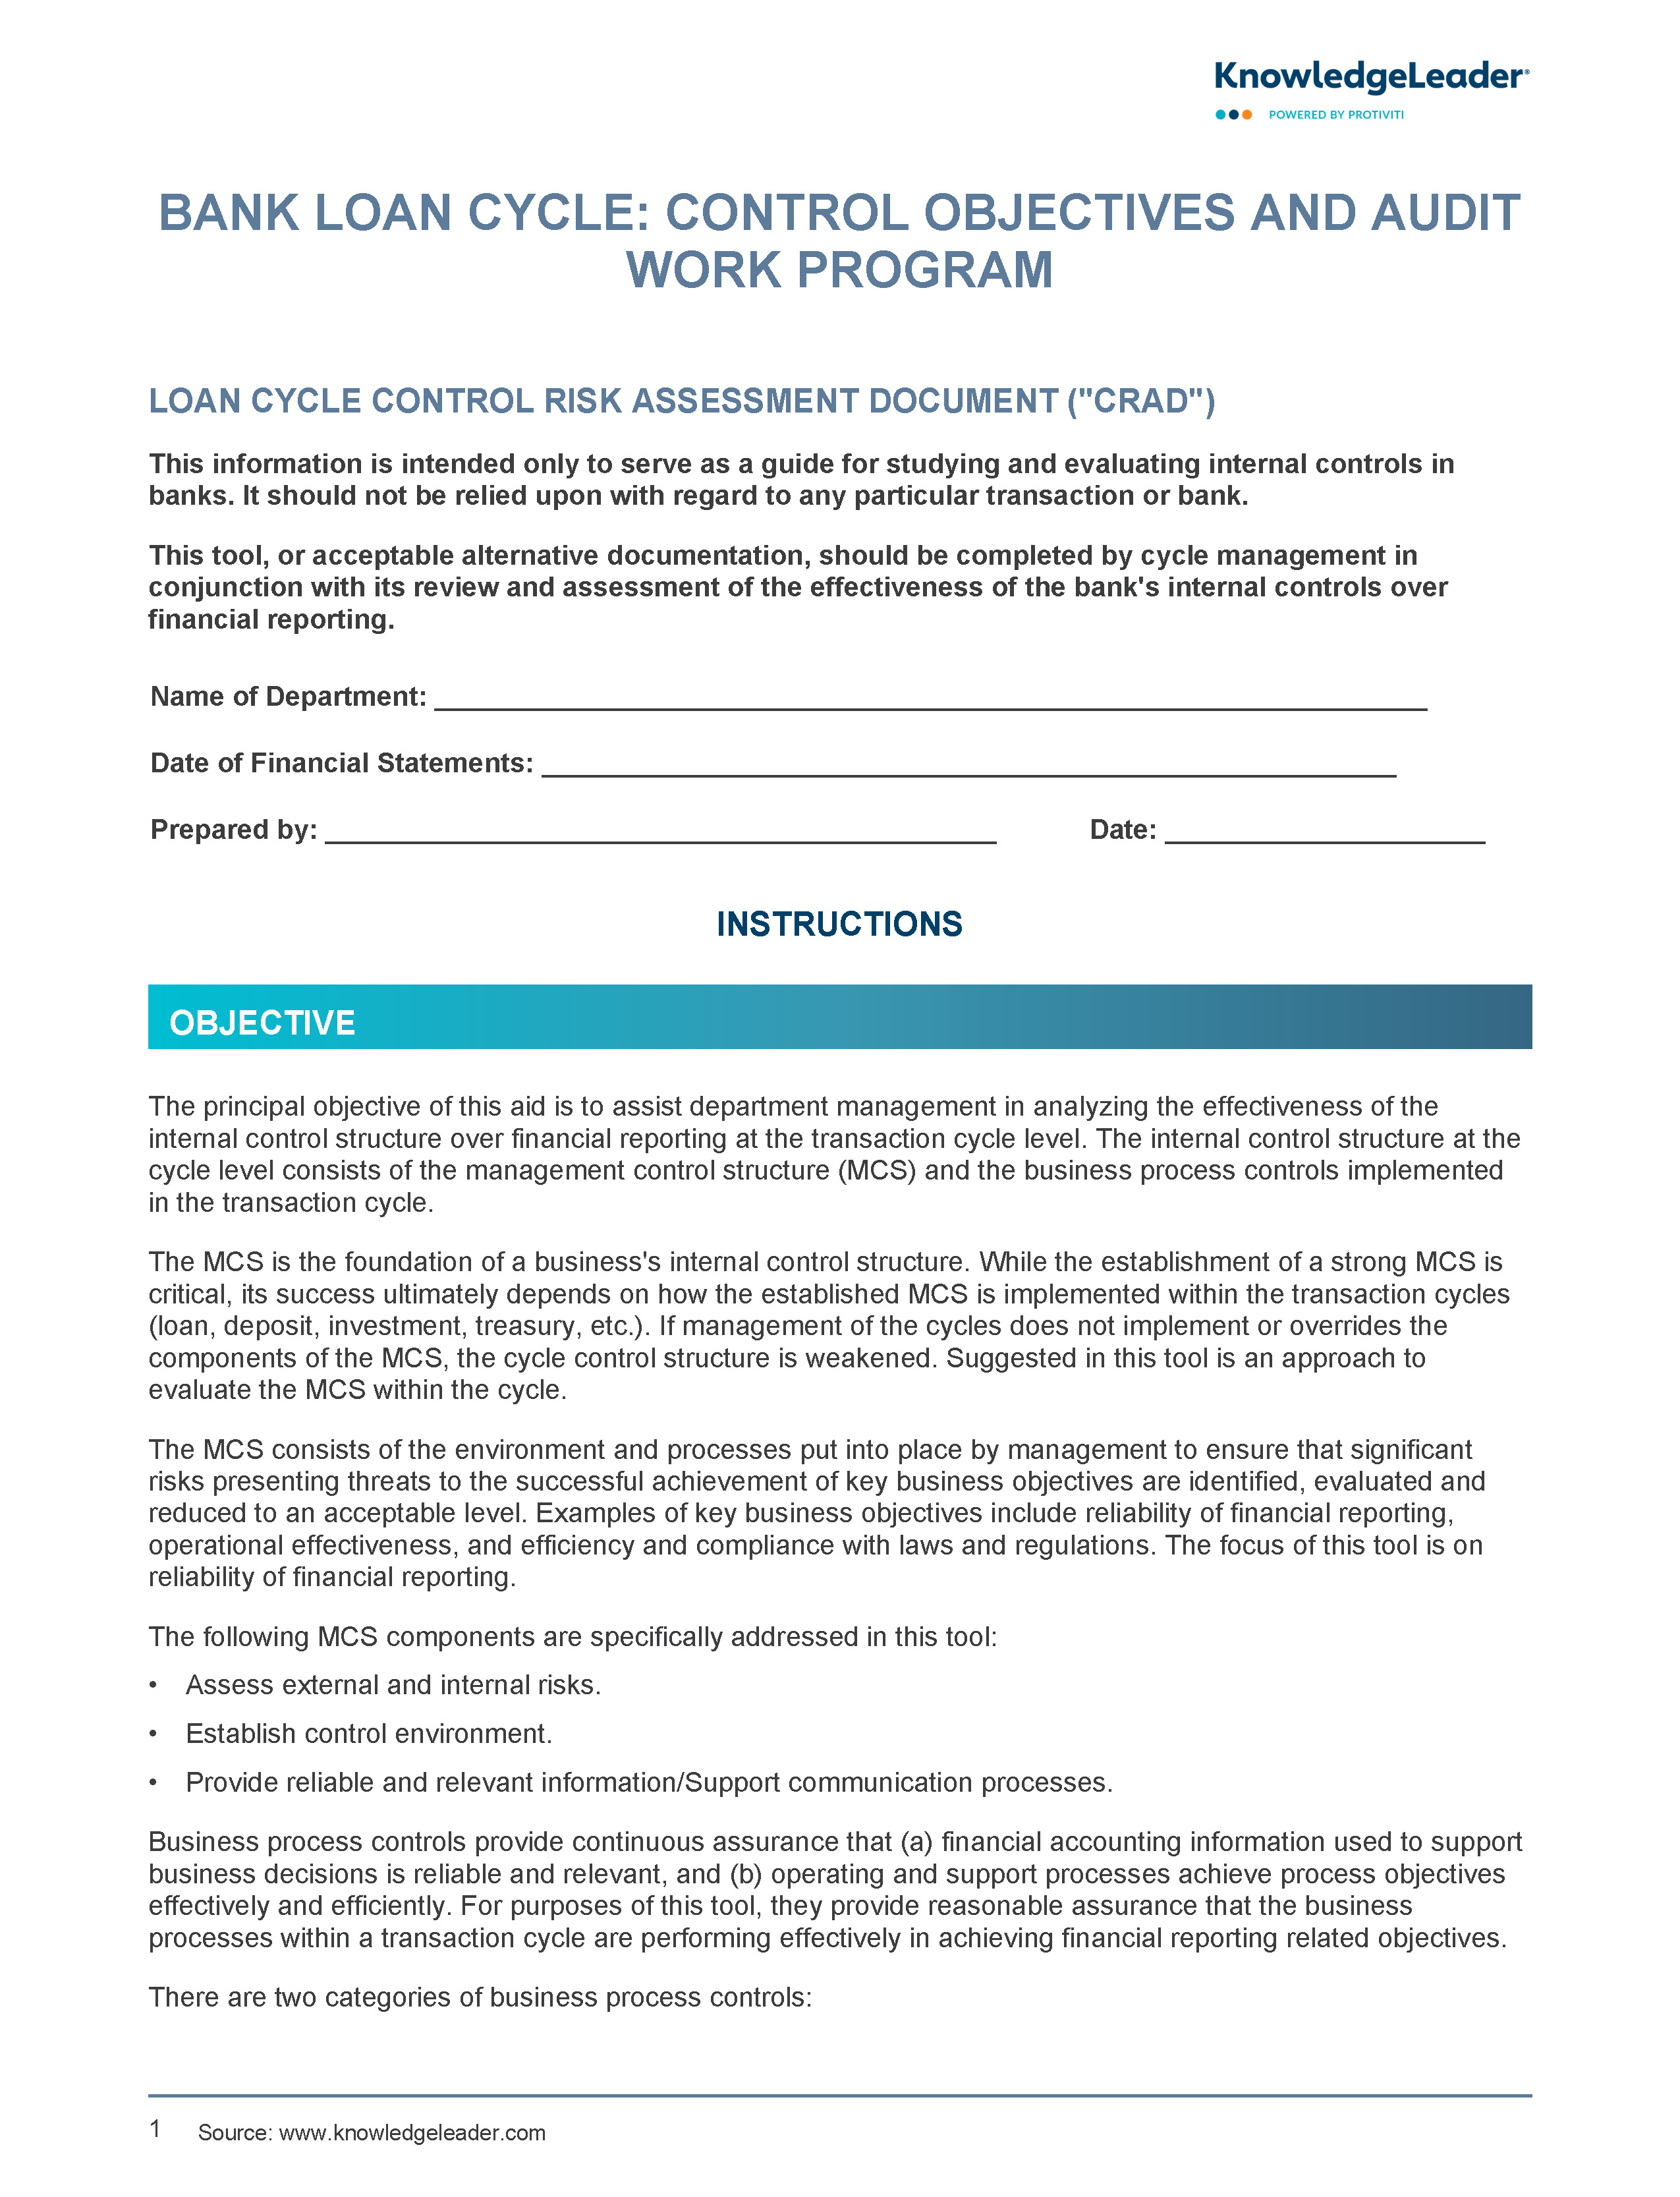 Screenshot of the first page of Bank Loan Cycle - Control Objectives and Audit Work Program 